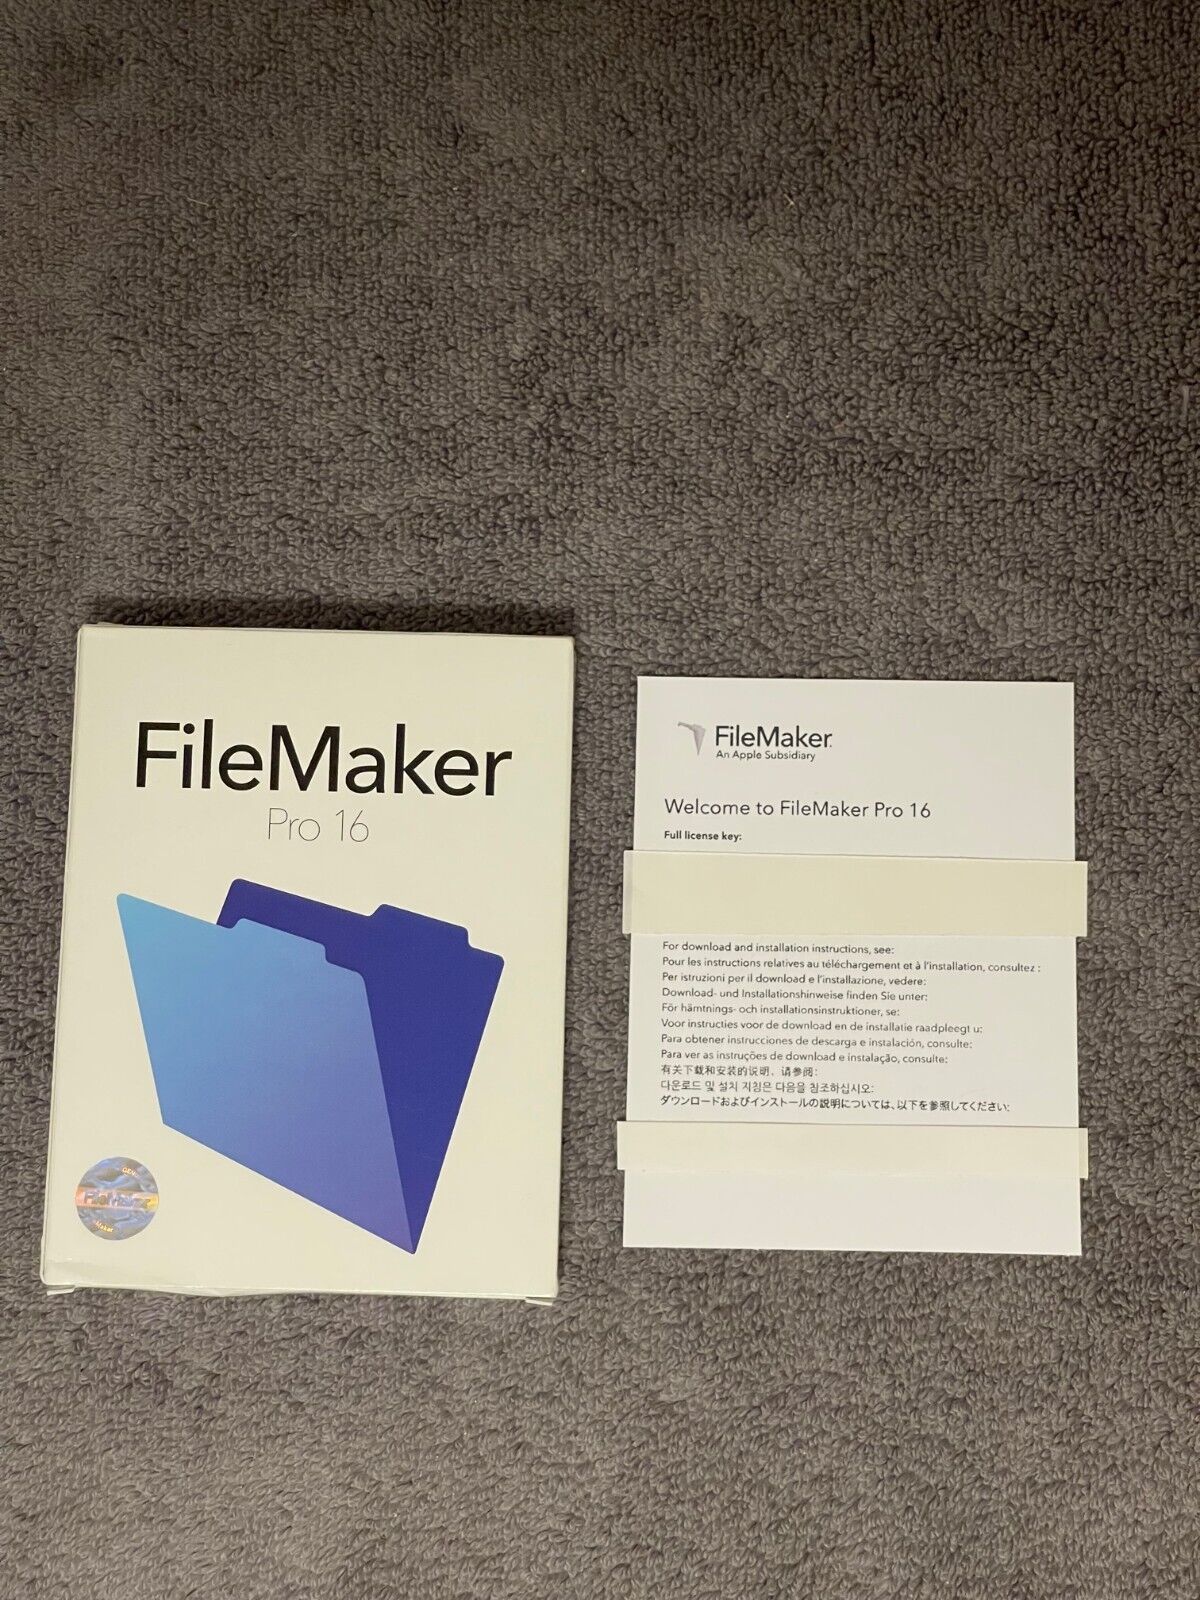 FileMaker Pro 16 Software Full Version For Mac and Windows, 